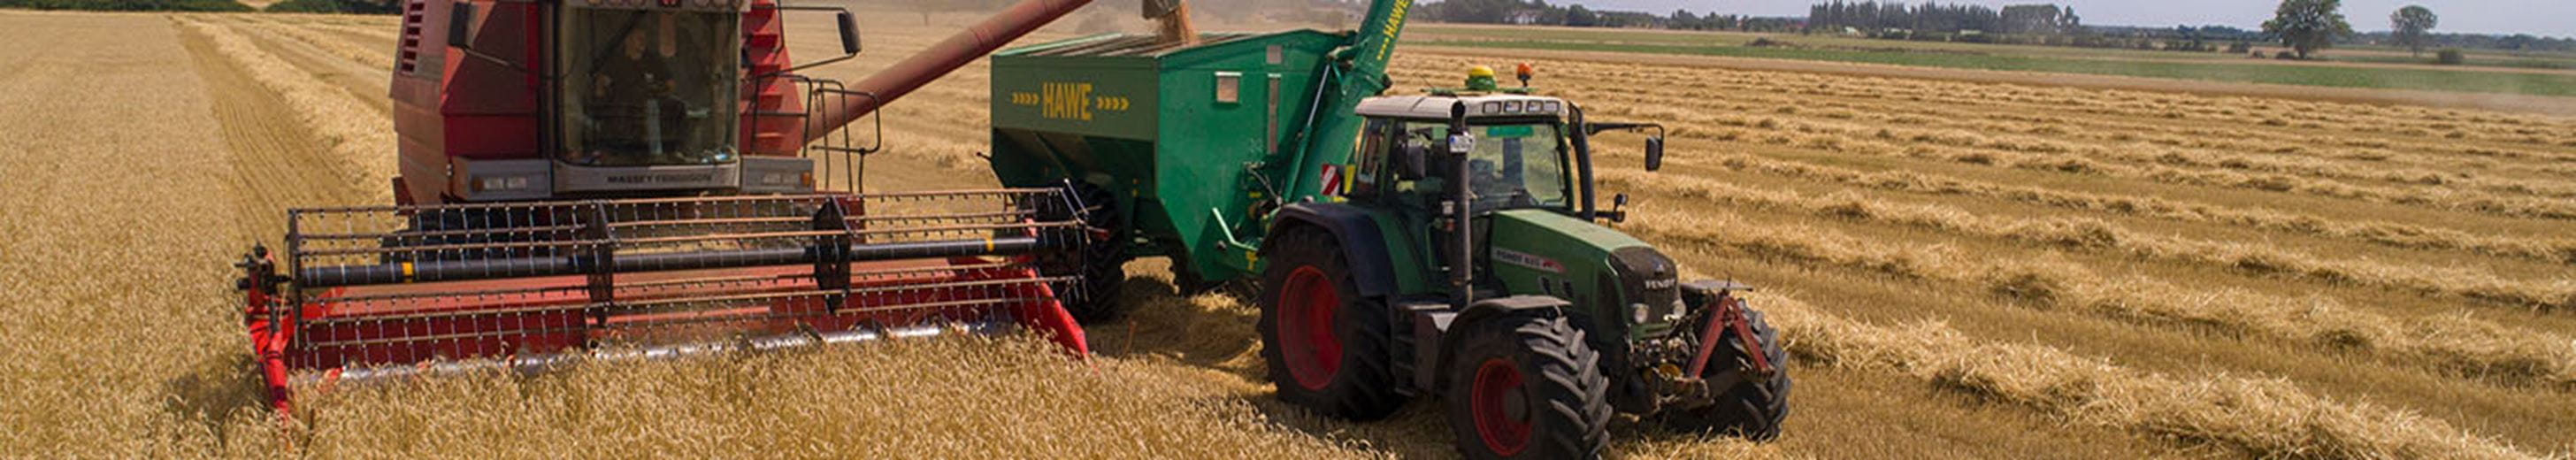 Rural View News Header - Aug 21 Tractor in field